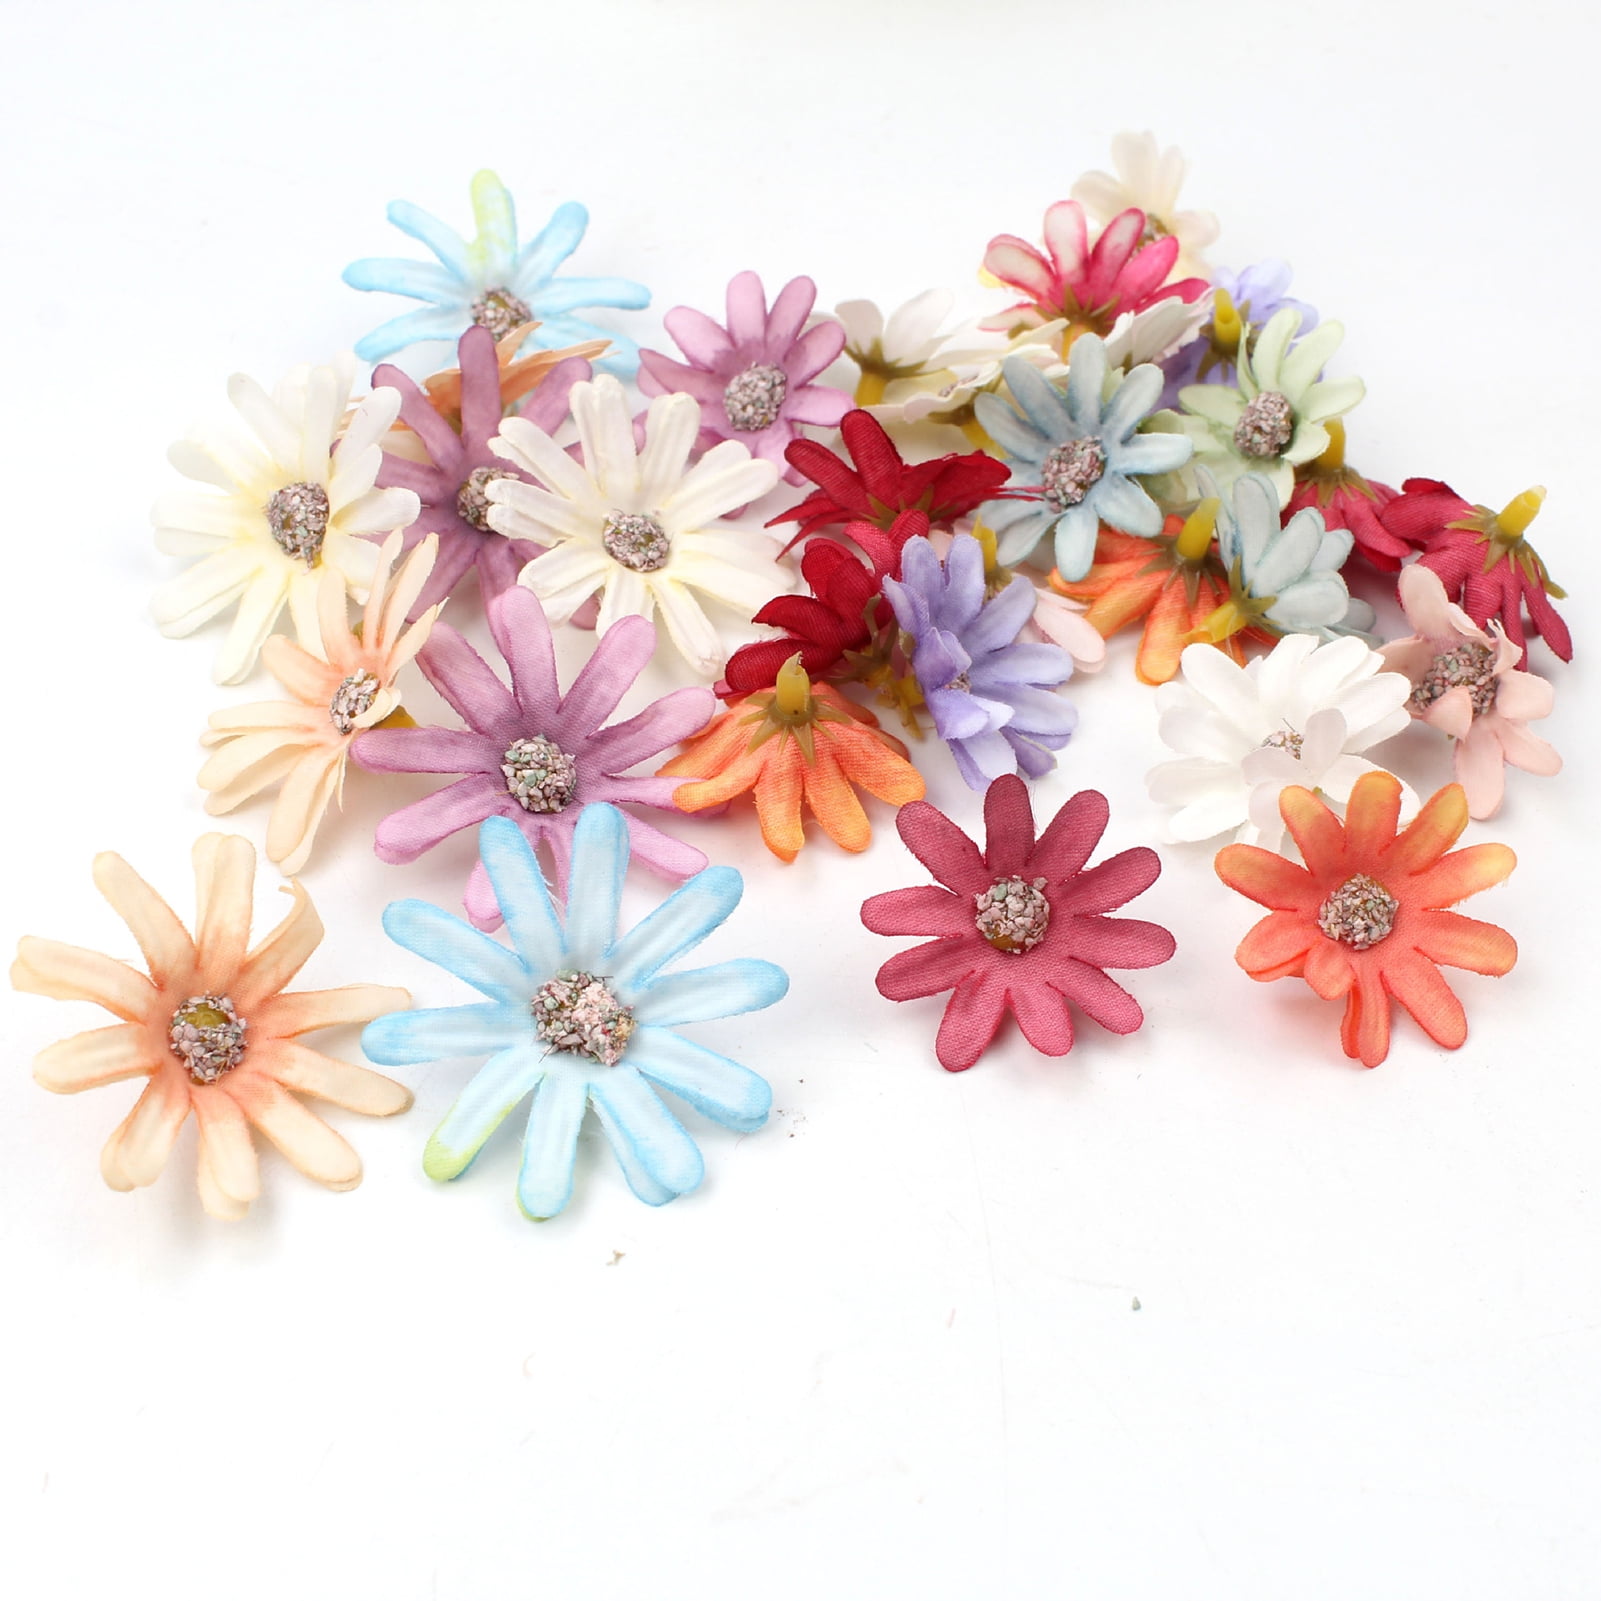 Windfall 5PCS Artificial Daisy Decor DIY Flower Decoration for Home Wedding  Party Car Corsage Decoration Fake Flowers Easy to Maintain Simulation  Flower Home Decor 